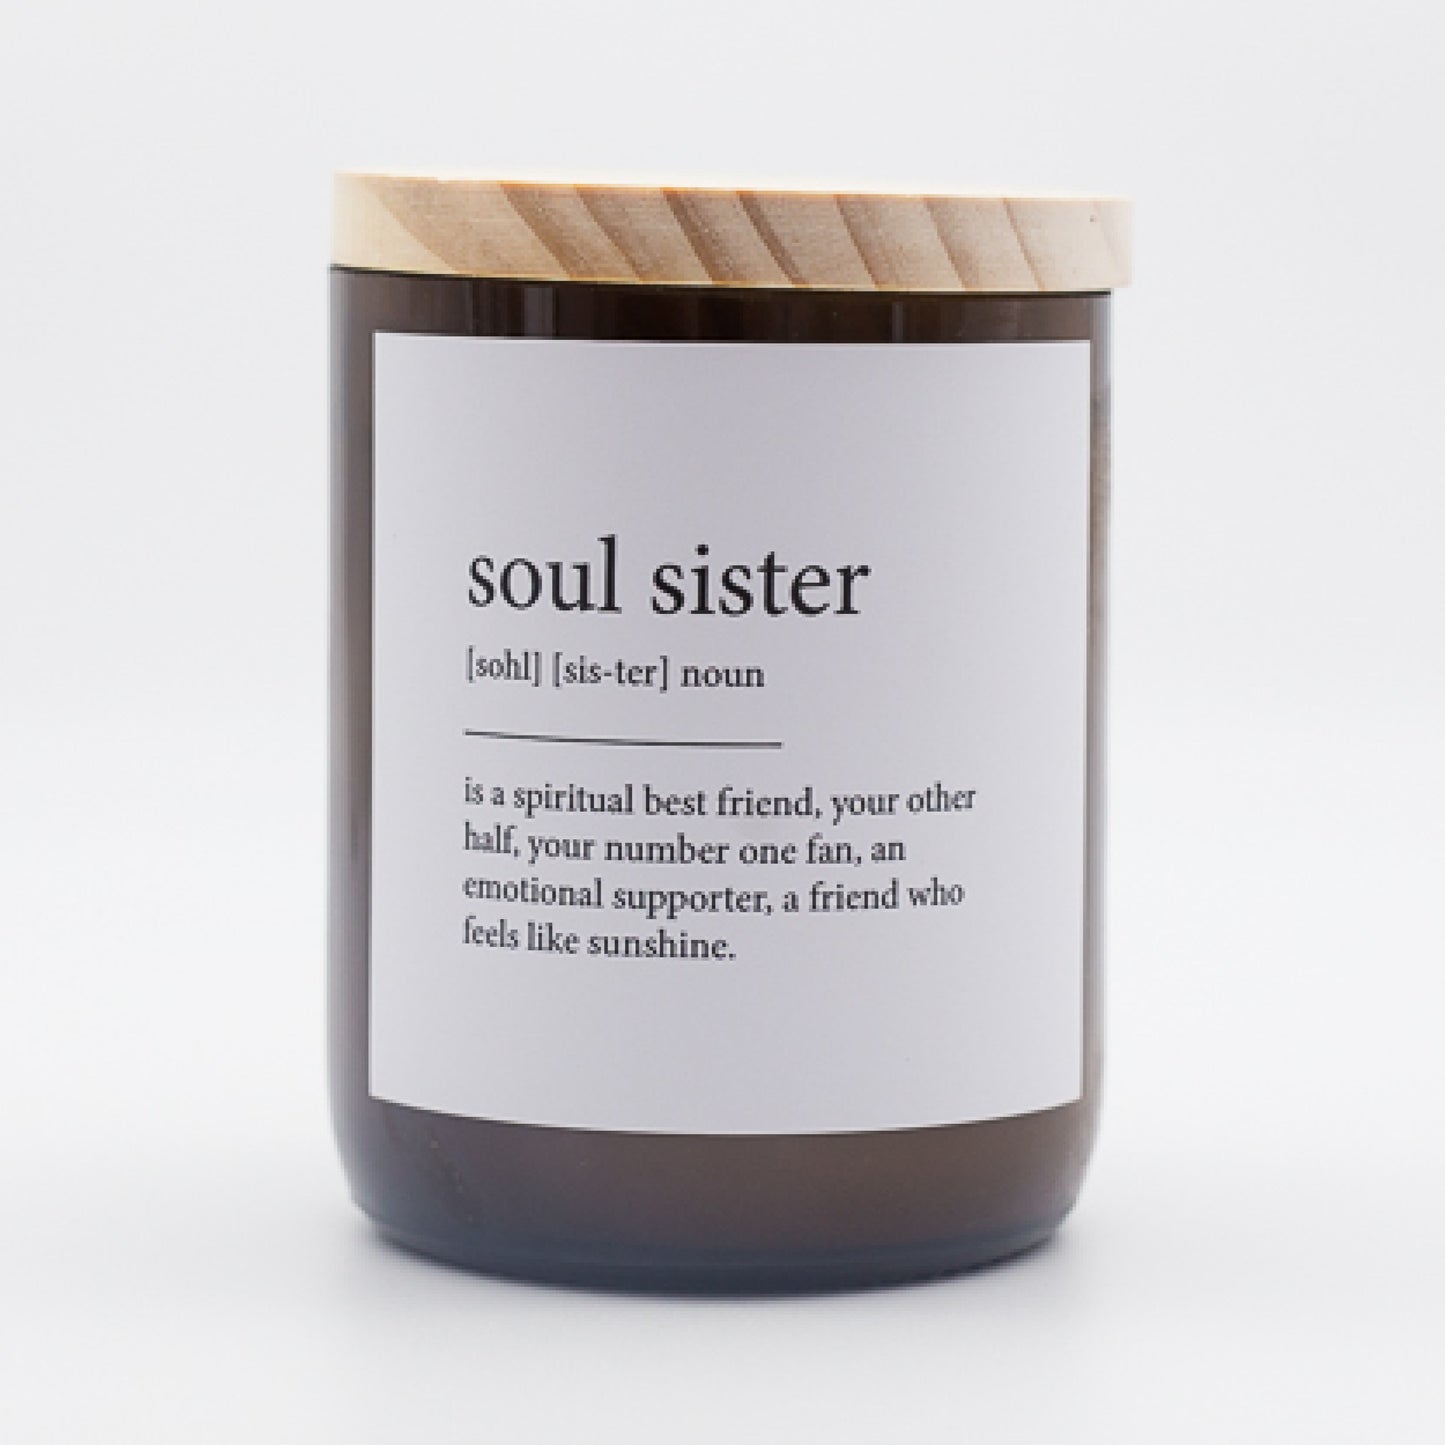 Dictionary Meaning Candle - soul sister